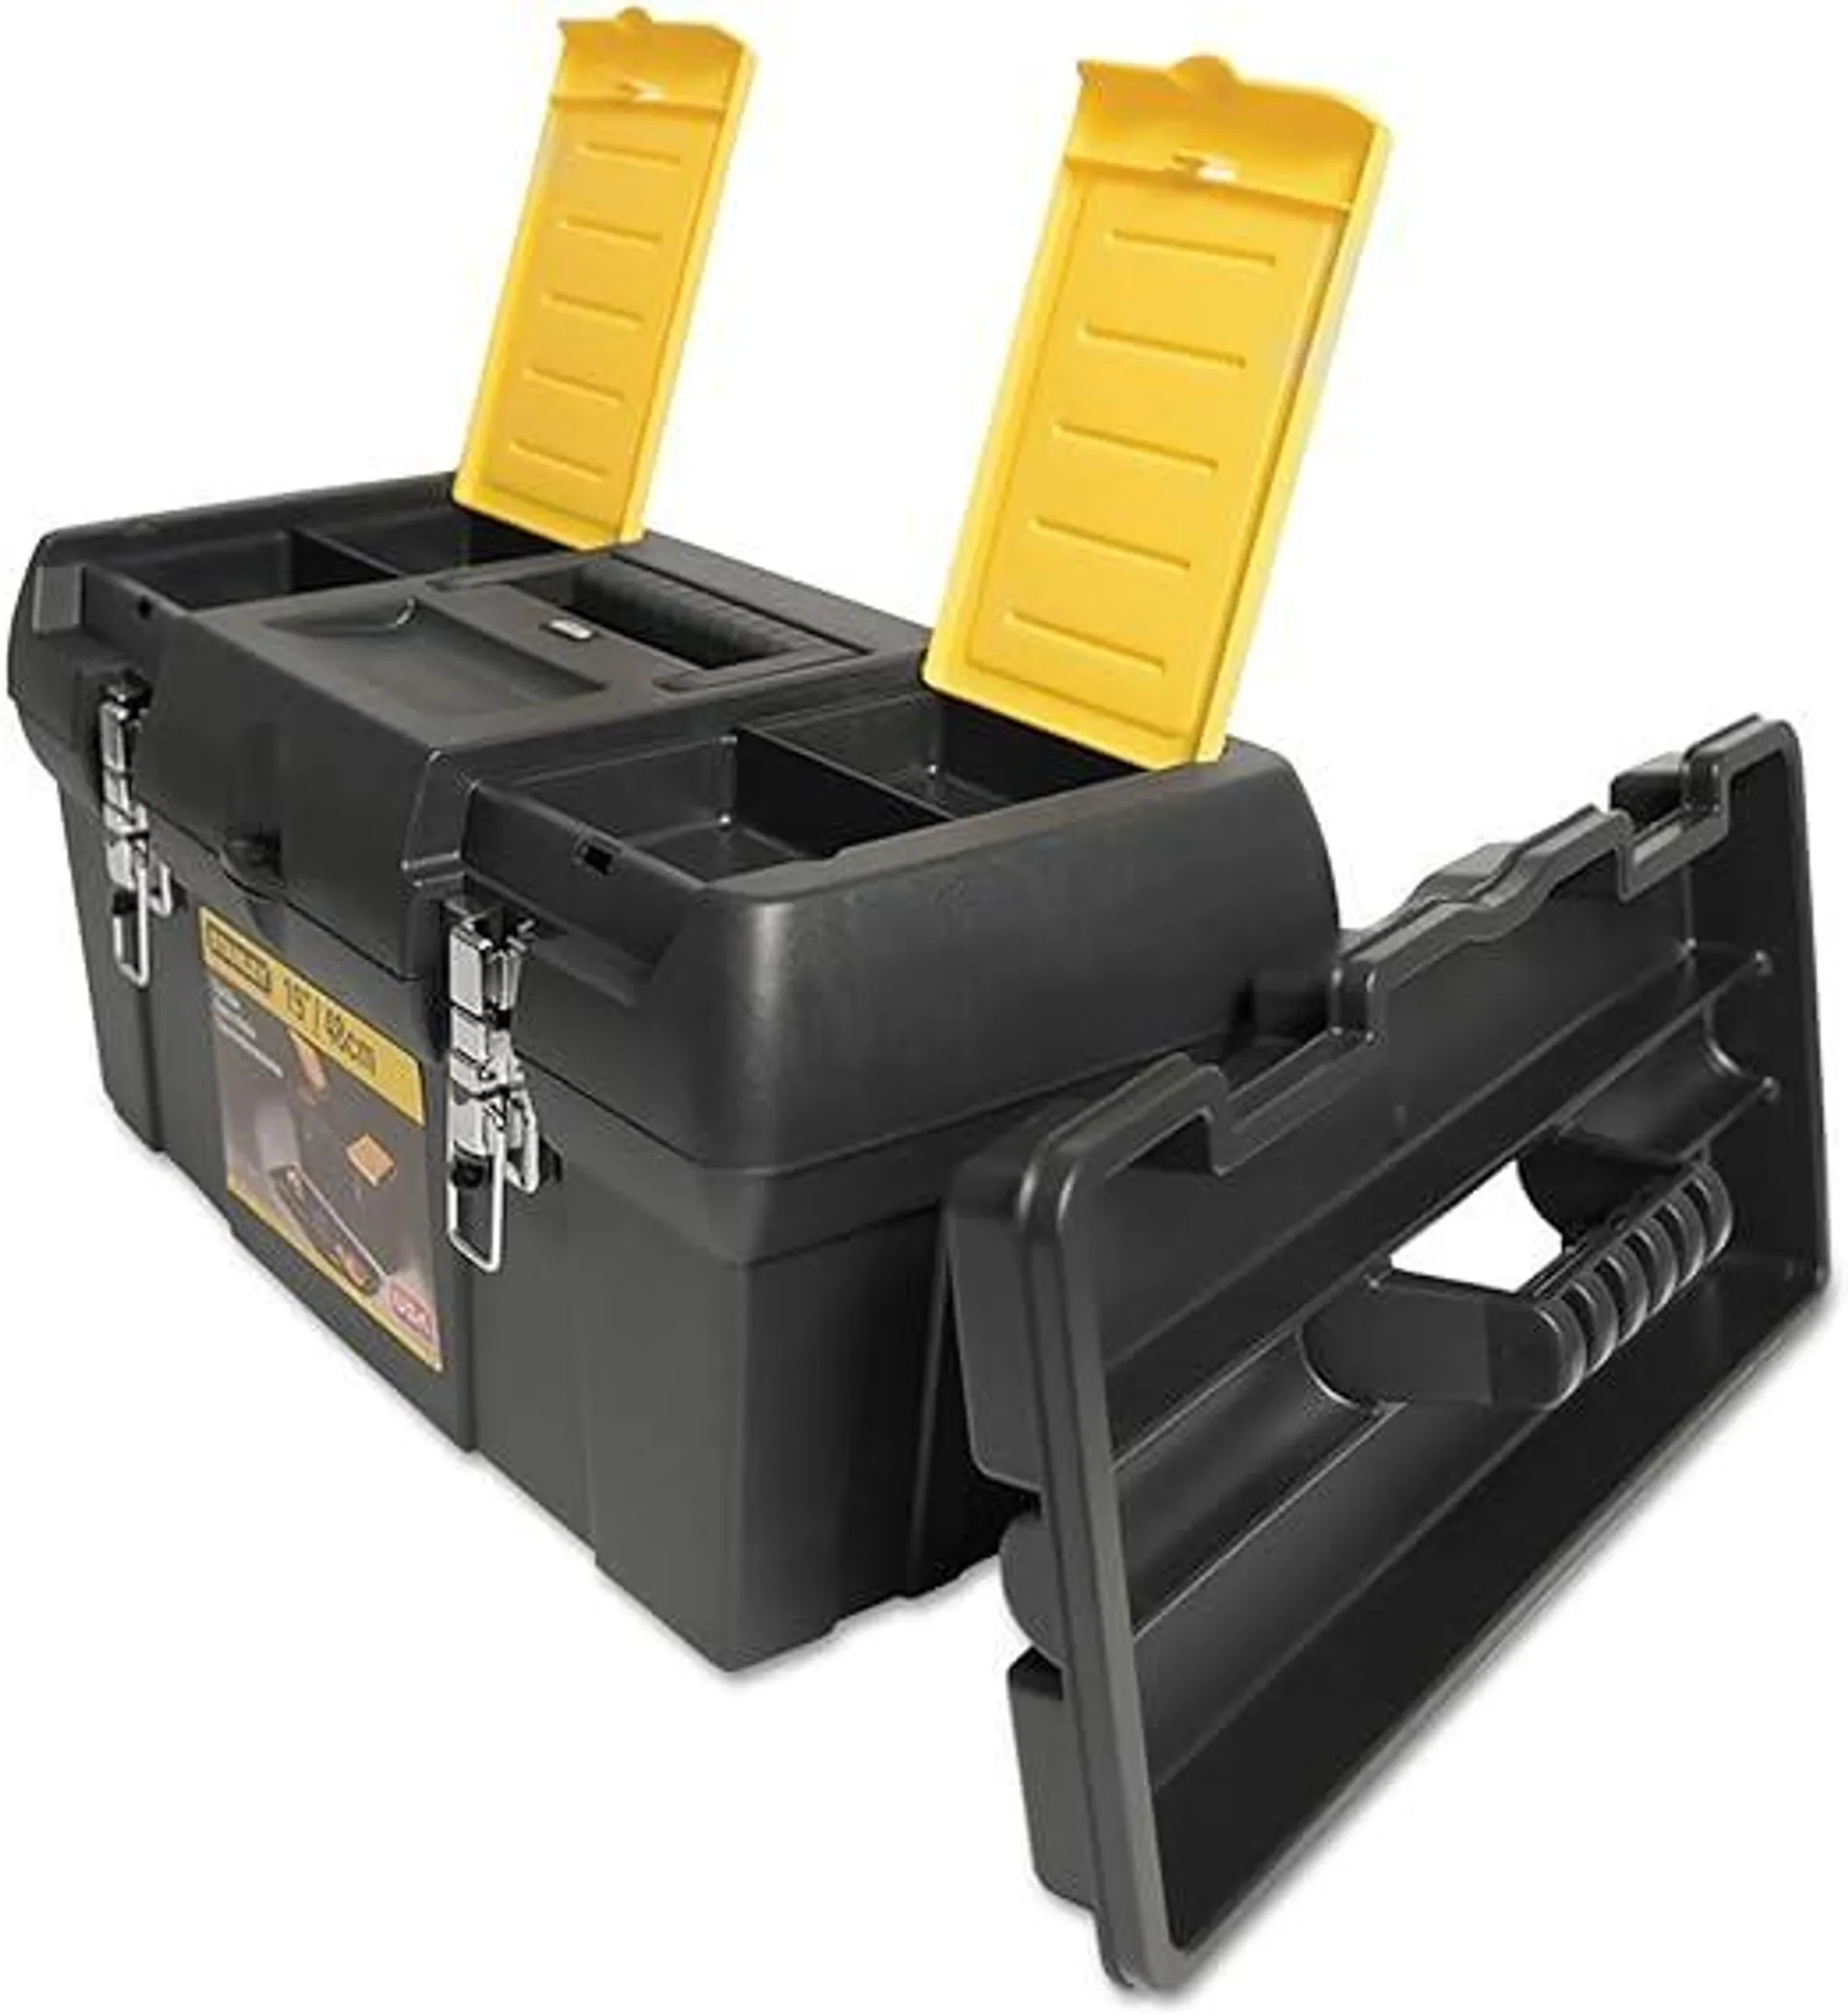 Stanley 019151M Series 2000 Toolbox W/Tray, Two Lid Compartments